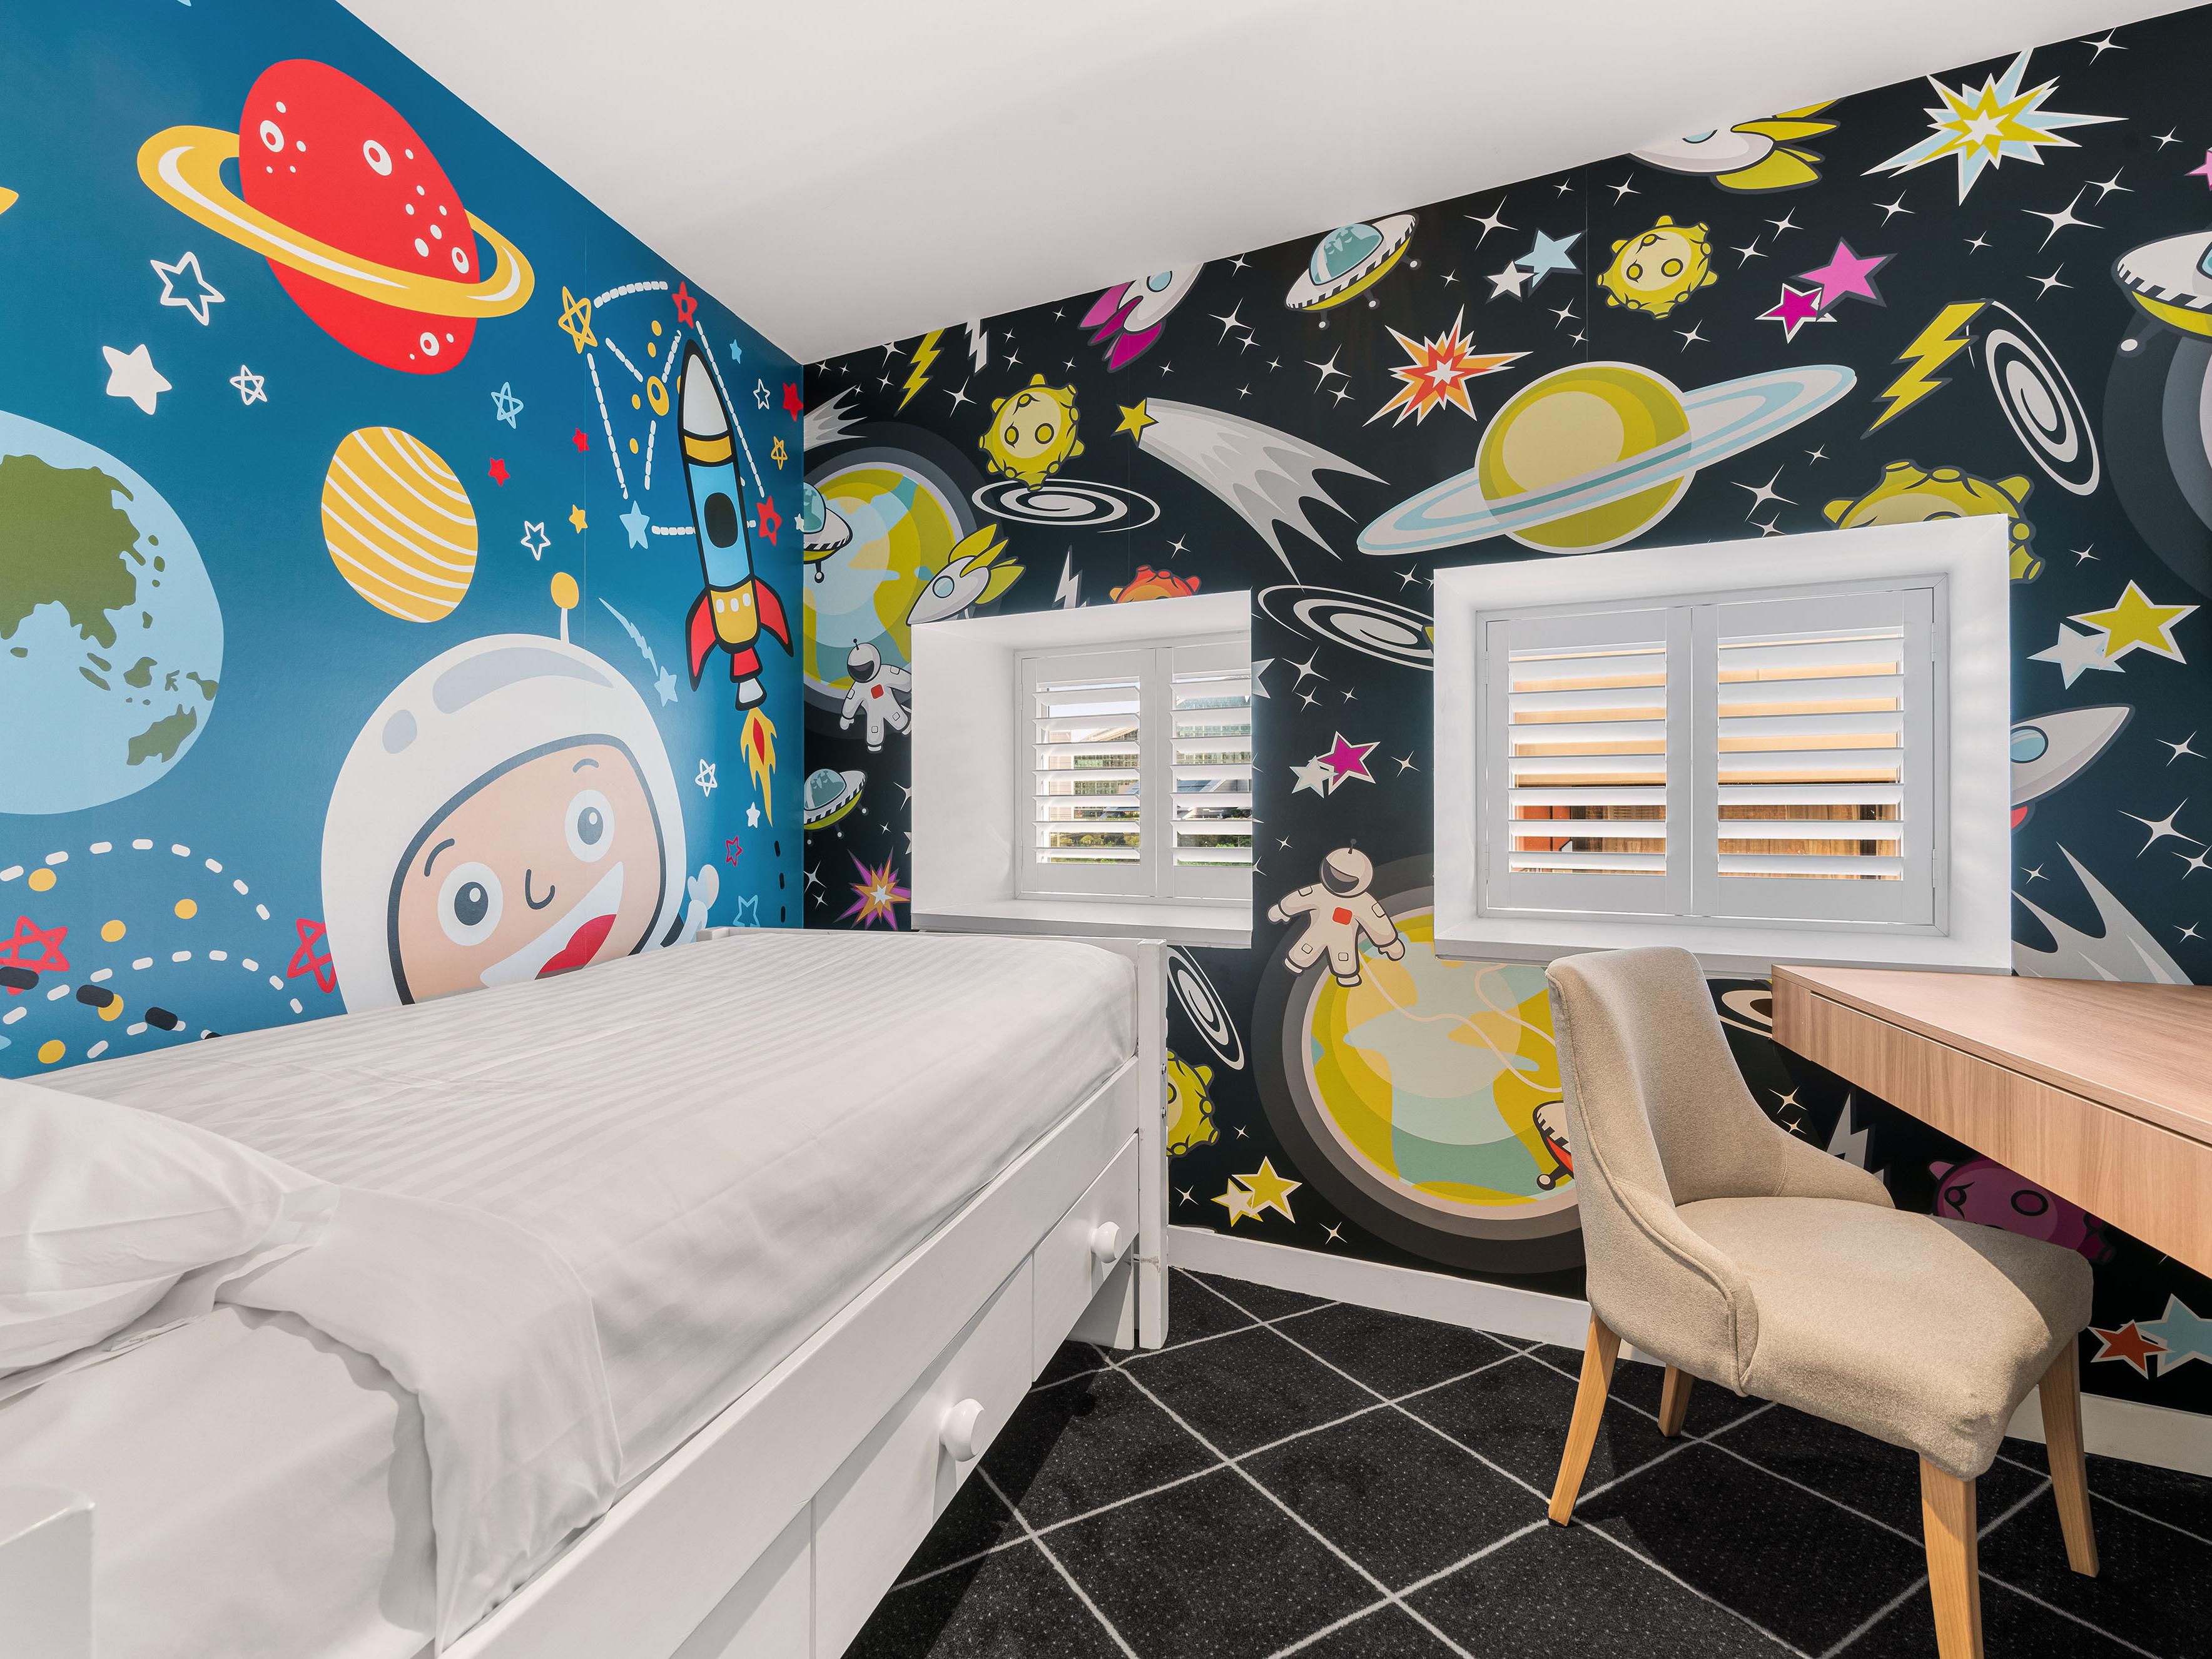 Your little ones will love our unique kids' rooms decorated with space, underwater or animal motifs. 